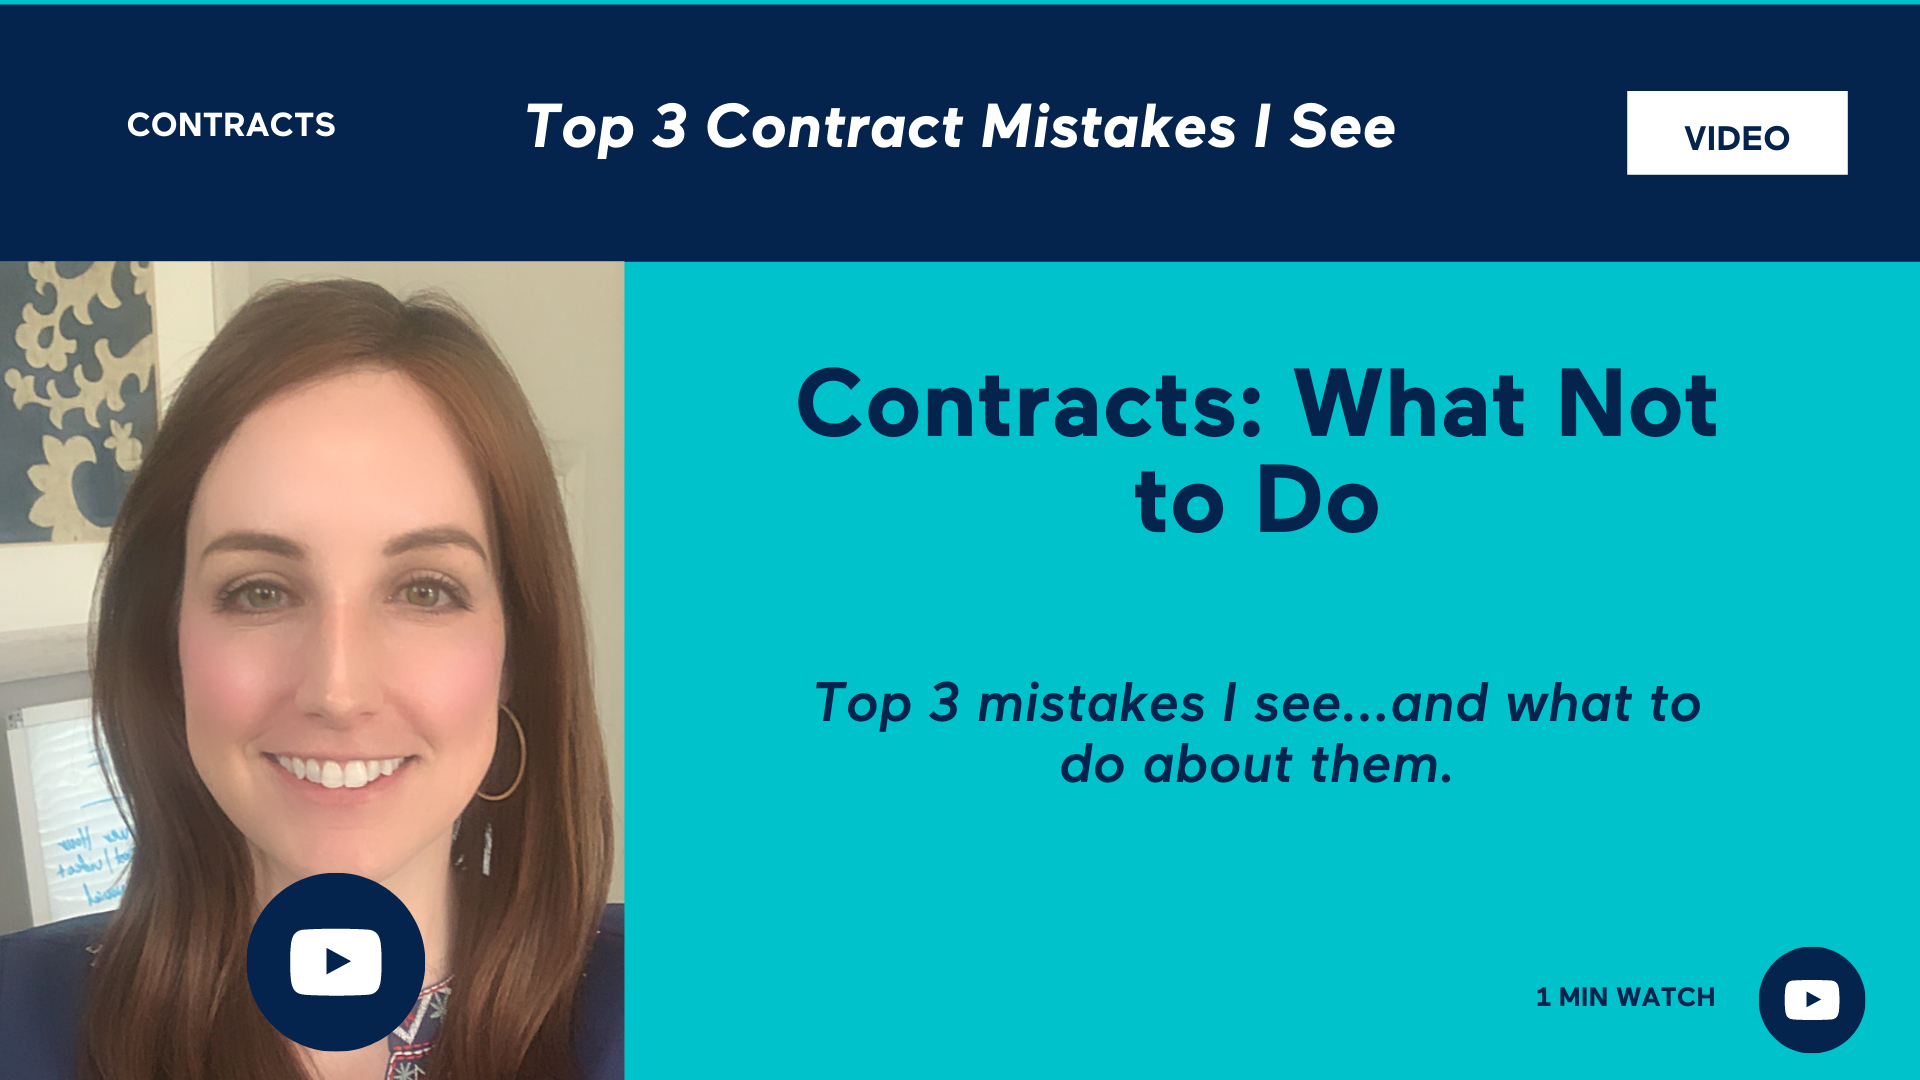 Top 3 Contract Mistakes I See